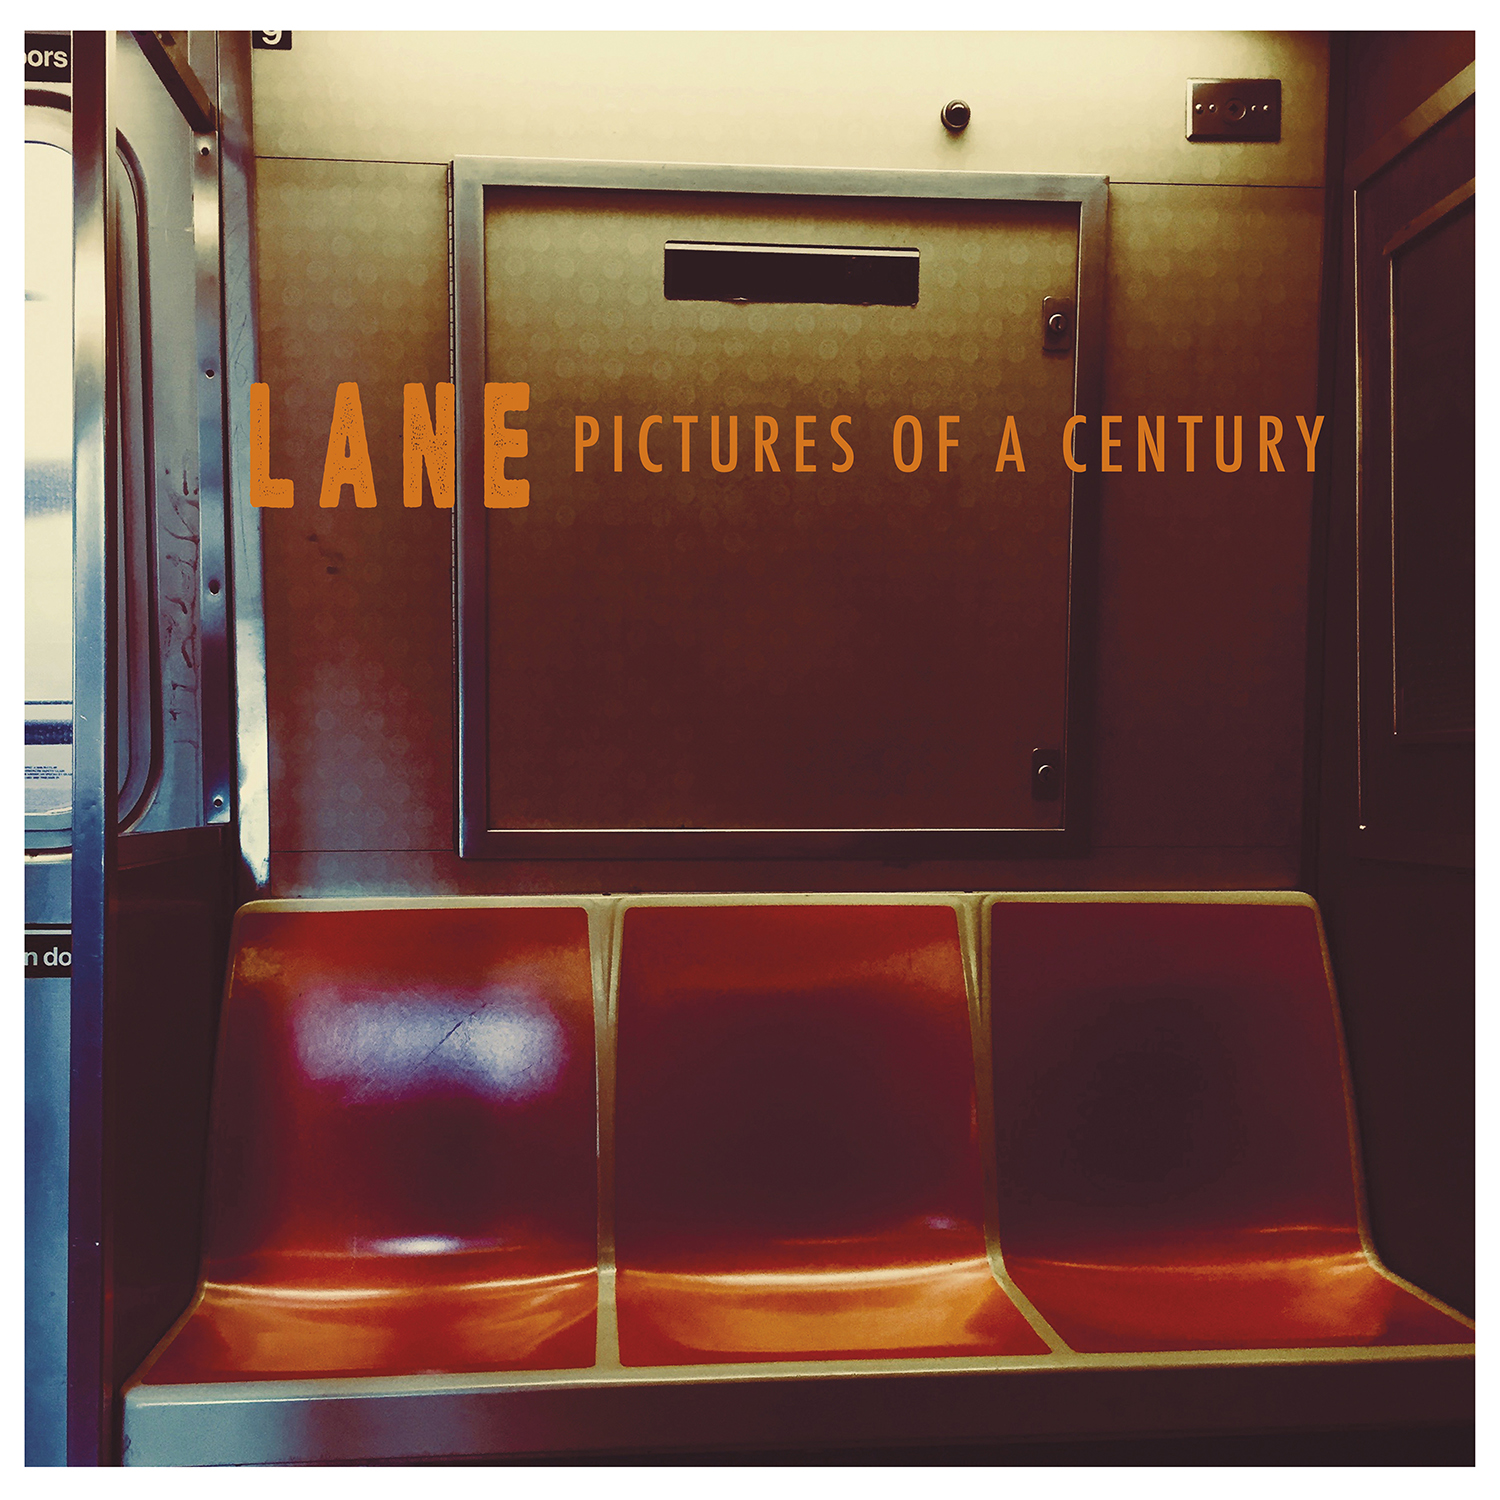 LANE pictures of a century vicious circle